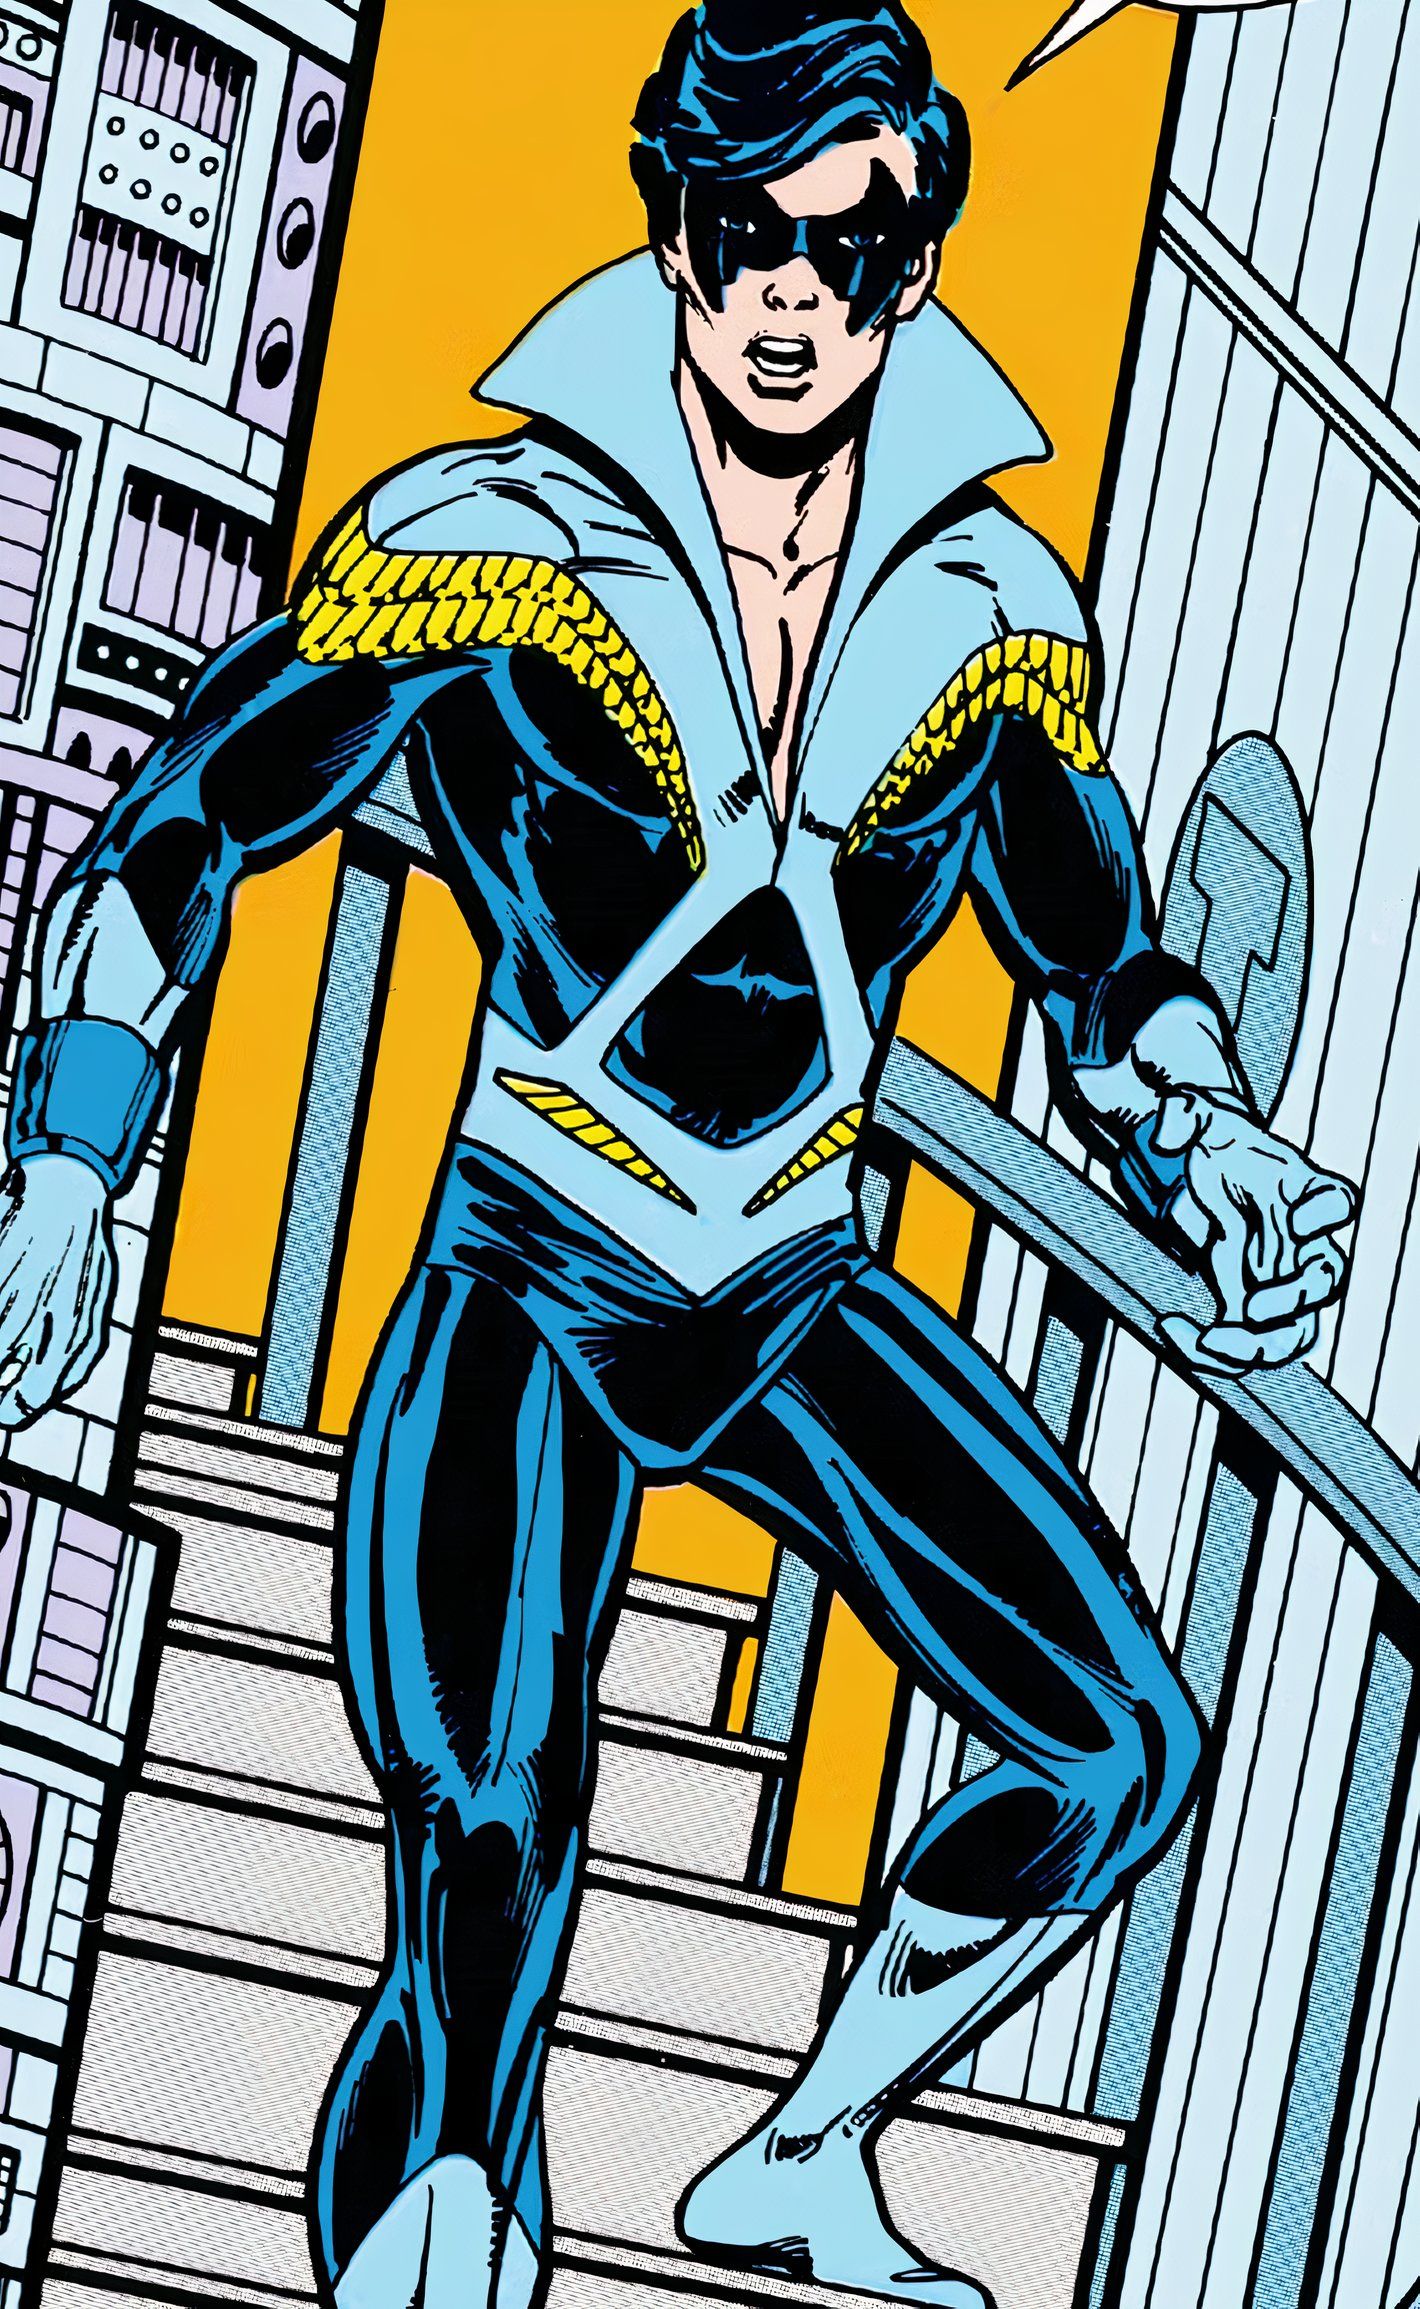 Dick Grayson debuts as Nightwing, showing off a groovy disco-era look.